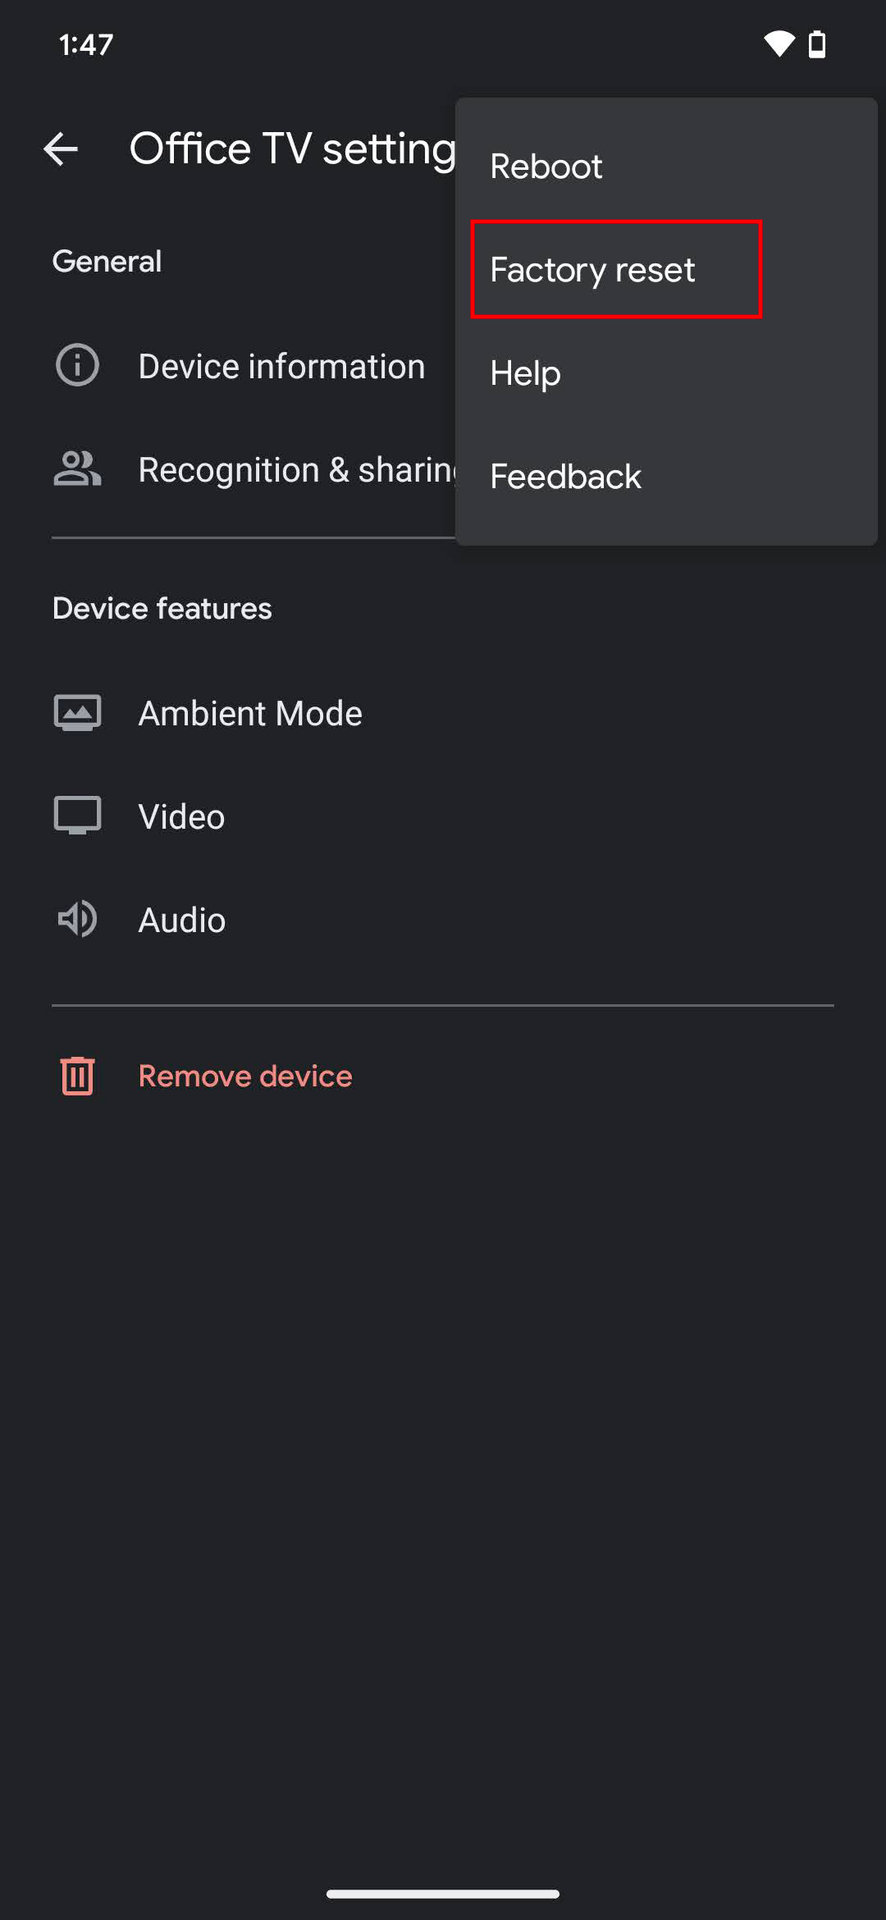 How to perform a factory reset on a Chromecast 4